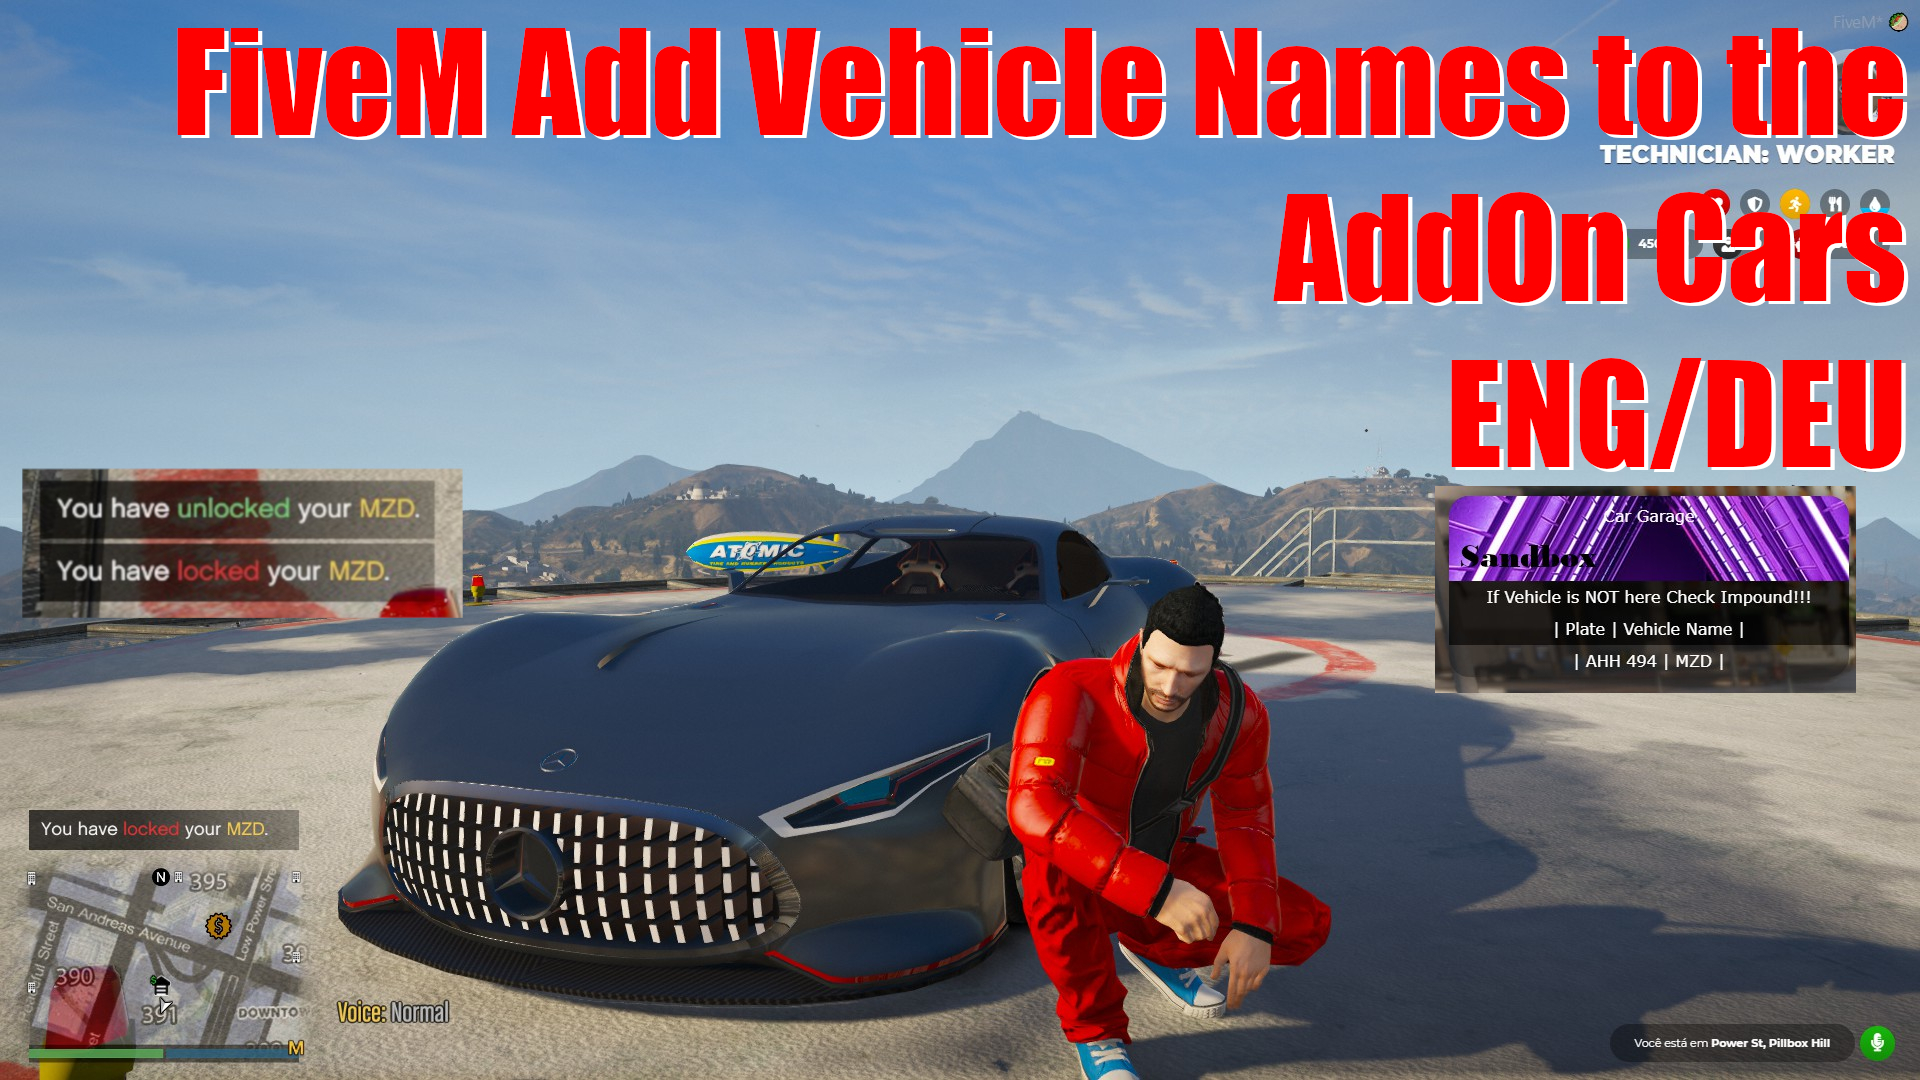 You are currently viewing FiveM Add Names to the AddOn Vehicles